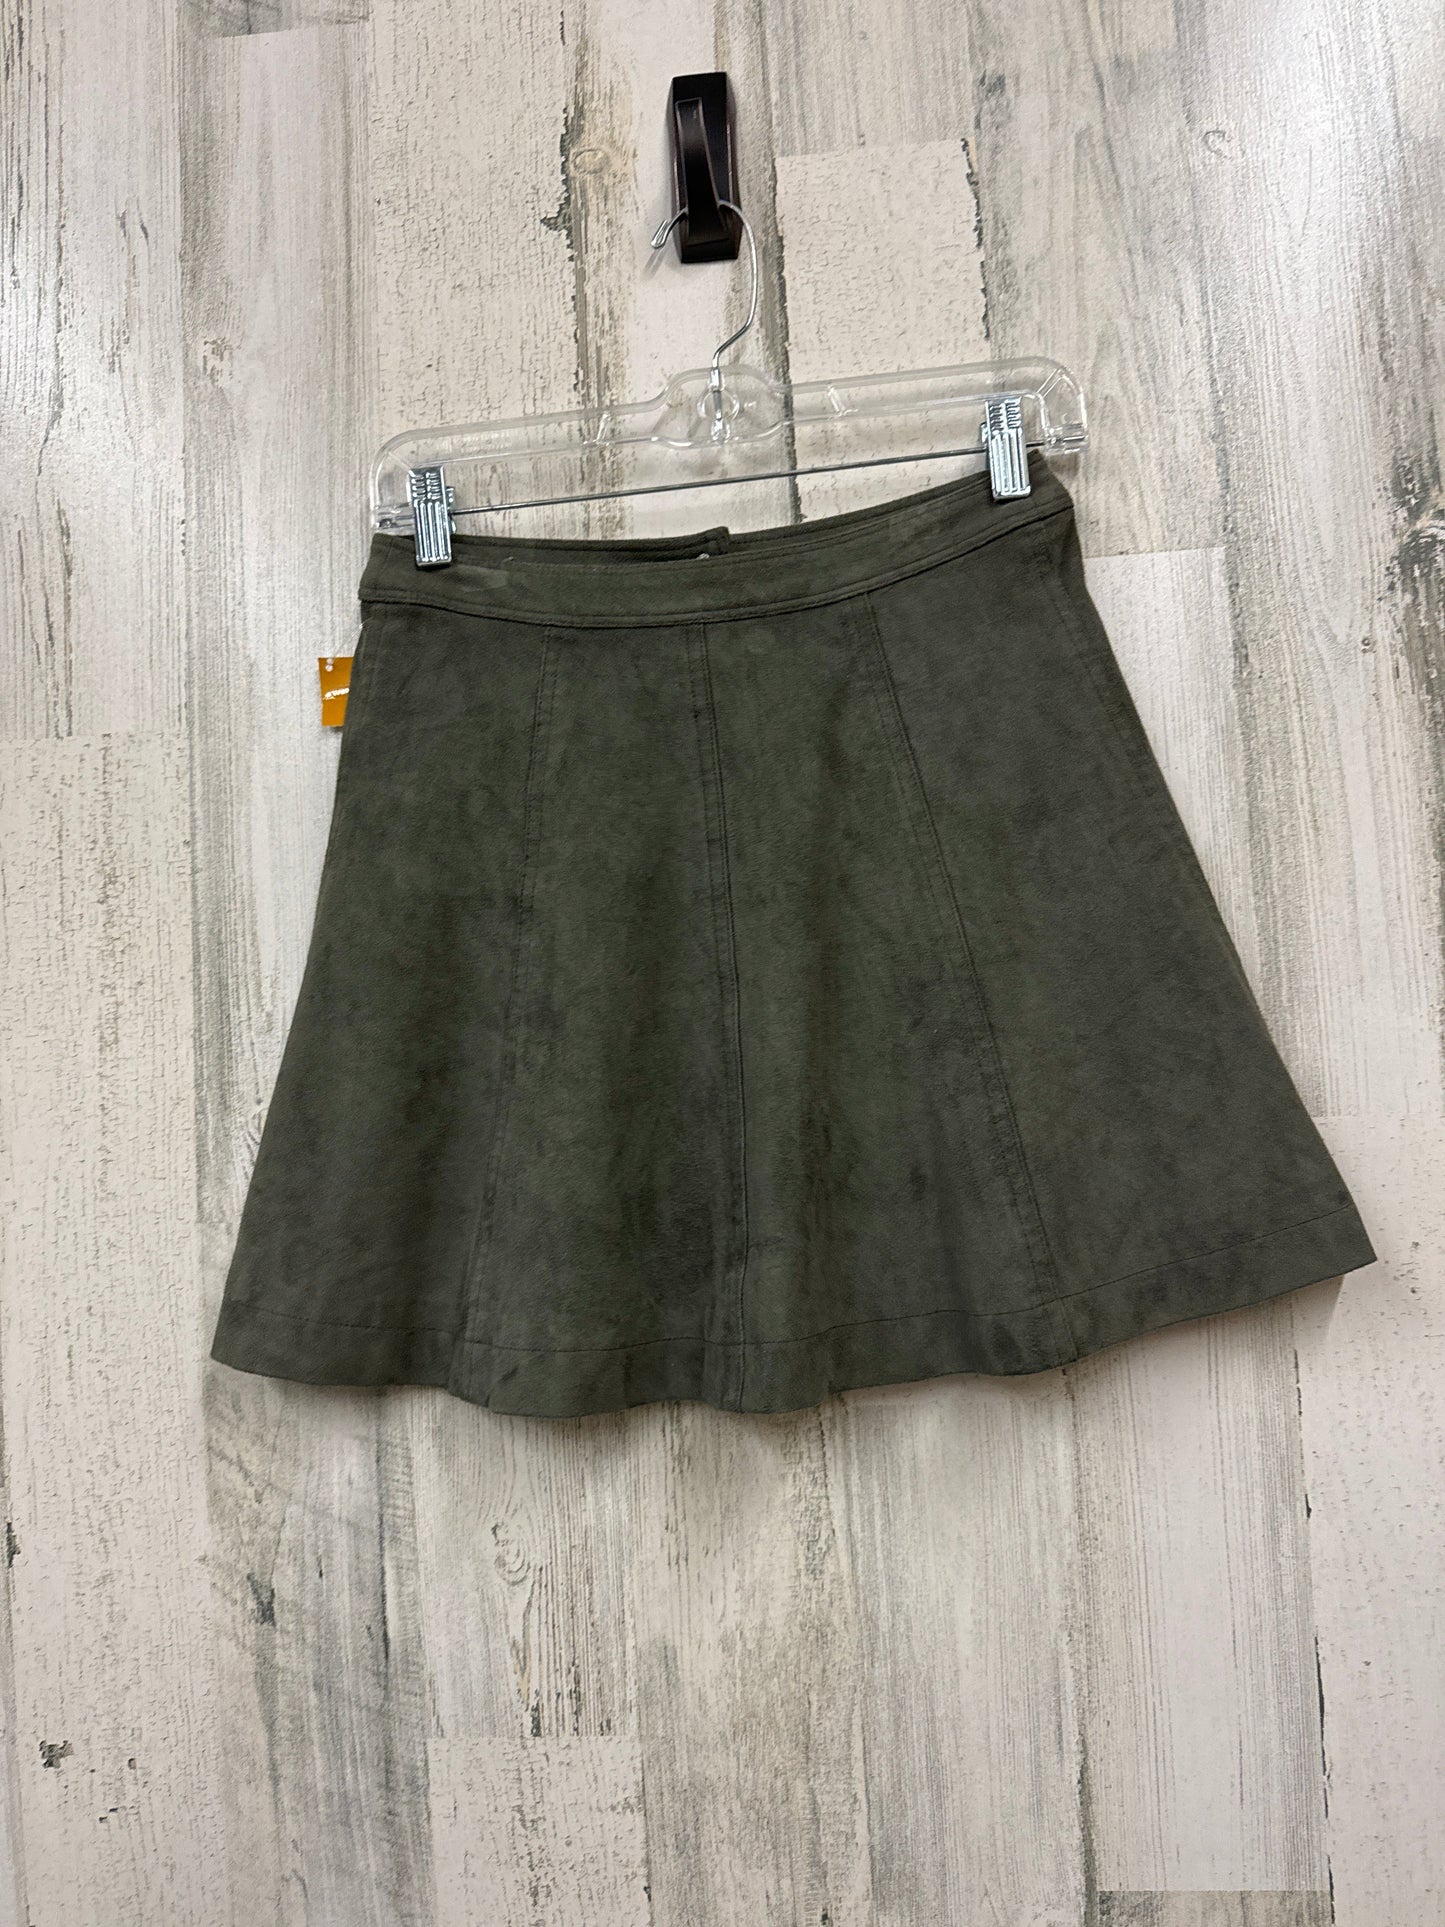 Skirt Mini & Short By Abercrombie And Fitch  Size: Xs